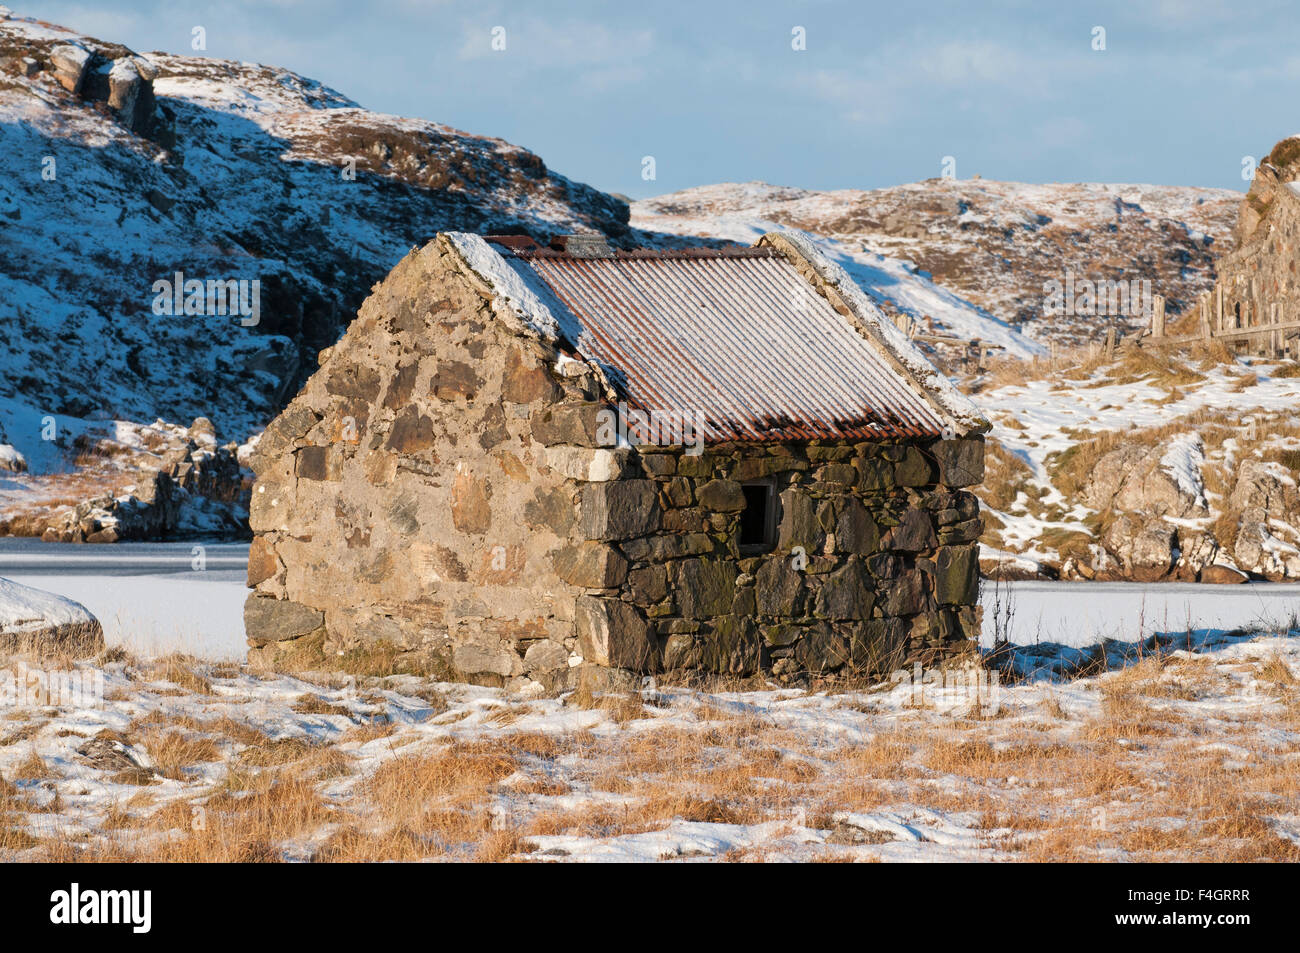 A small shieling or bothy shelter Stock Photo